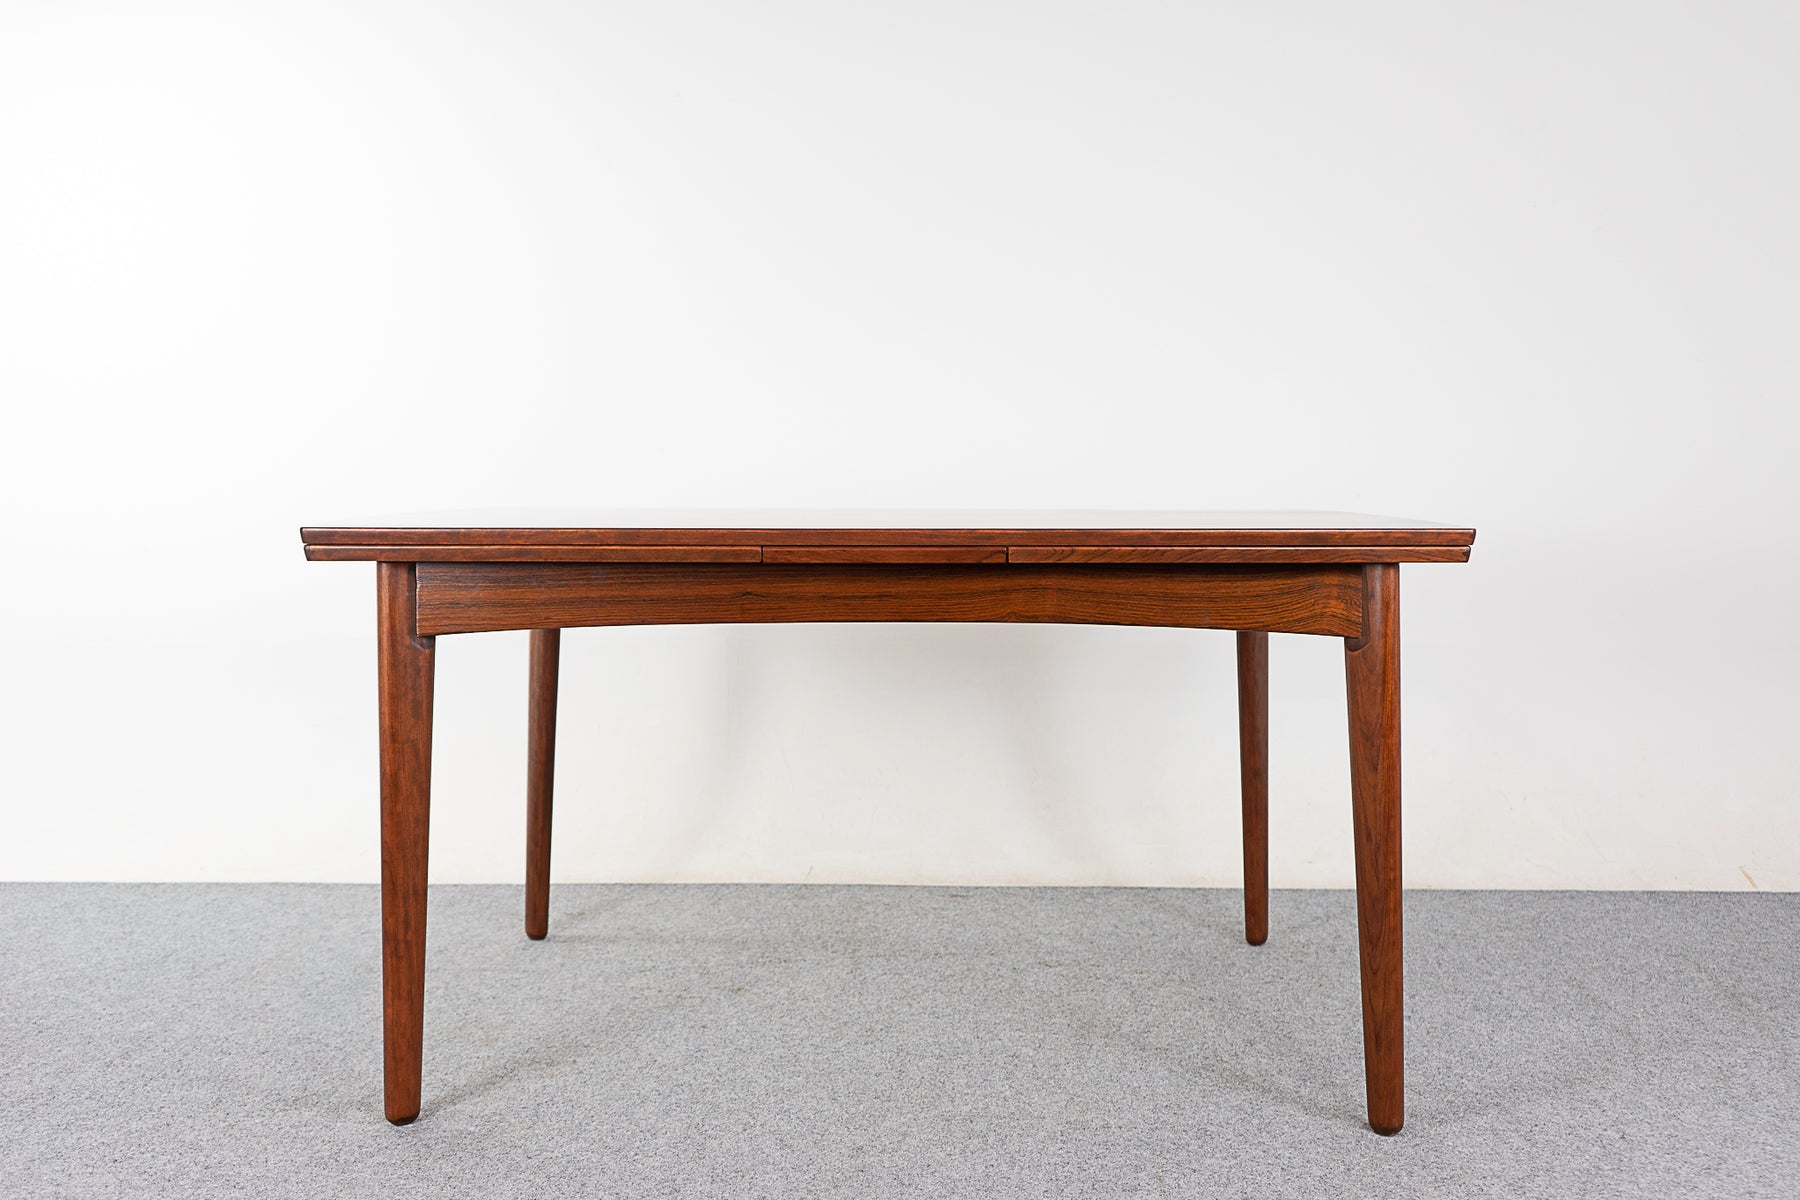 Rosewood Draw Leaf Dining Table - (321-022)